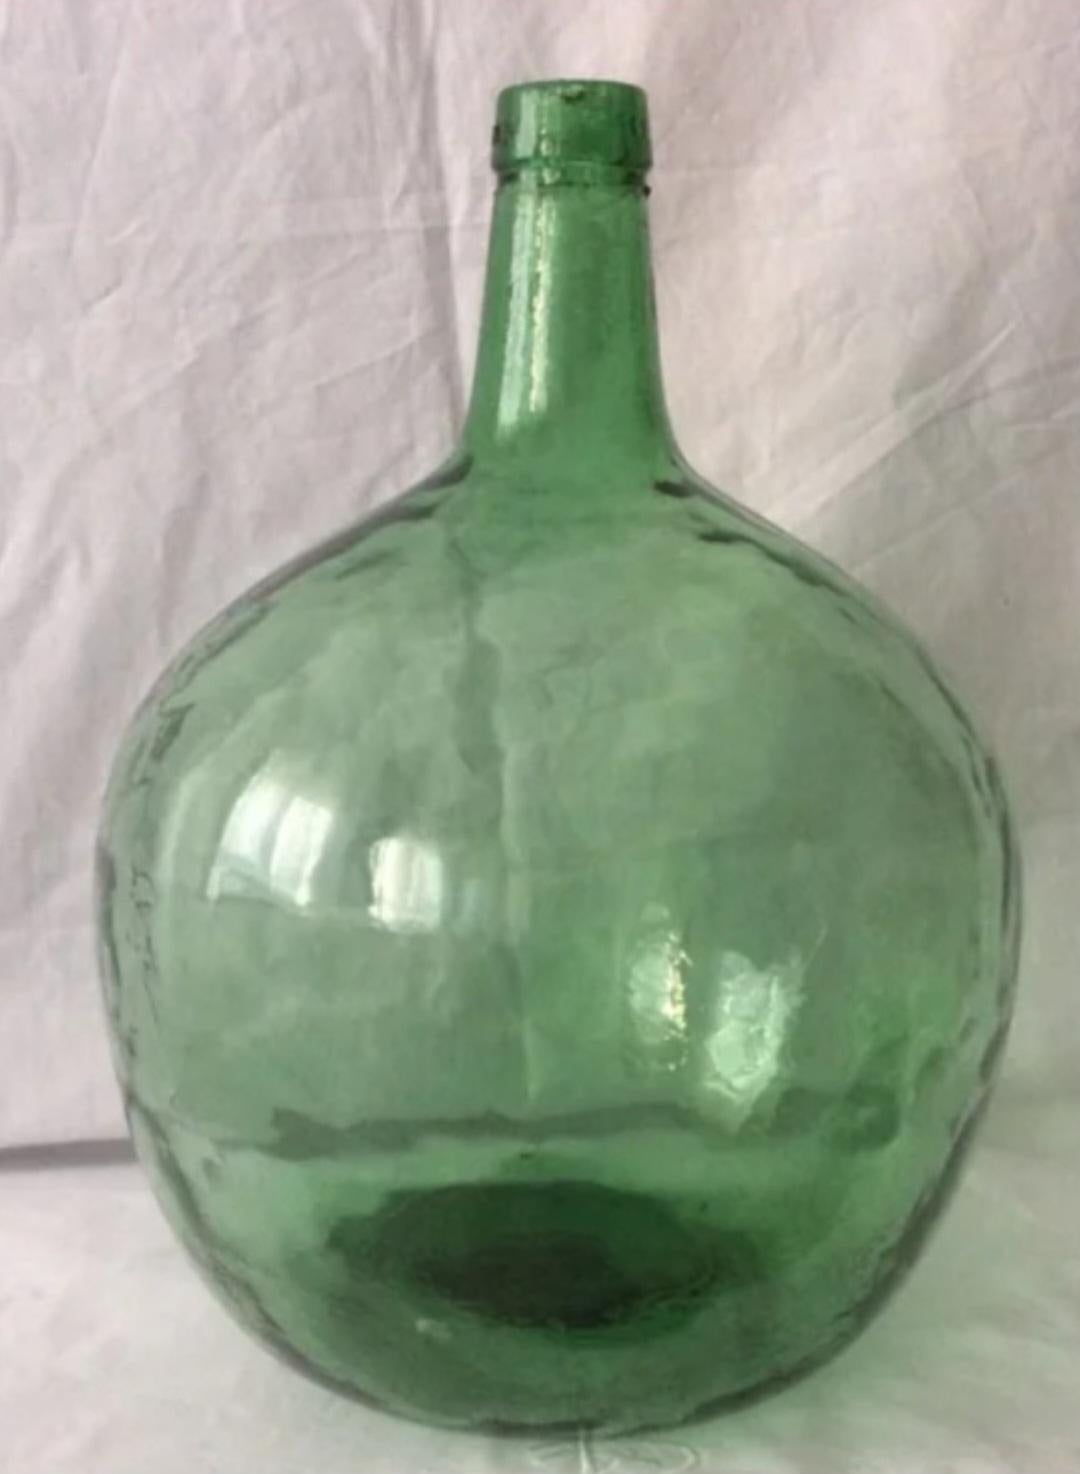 
Glass wine carafes viresa for wine
In this case it is green glass, but it can be almost transparent
Different models can also be sent
and different sizes
The largest is 16 liters, what is this model?
If you want a larger piece you can sell it, but